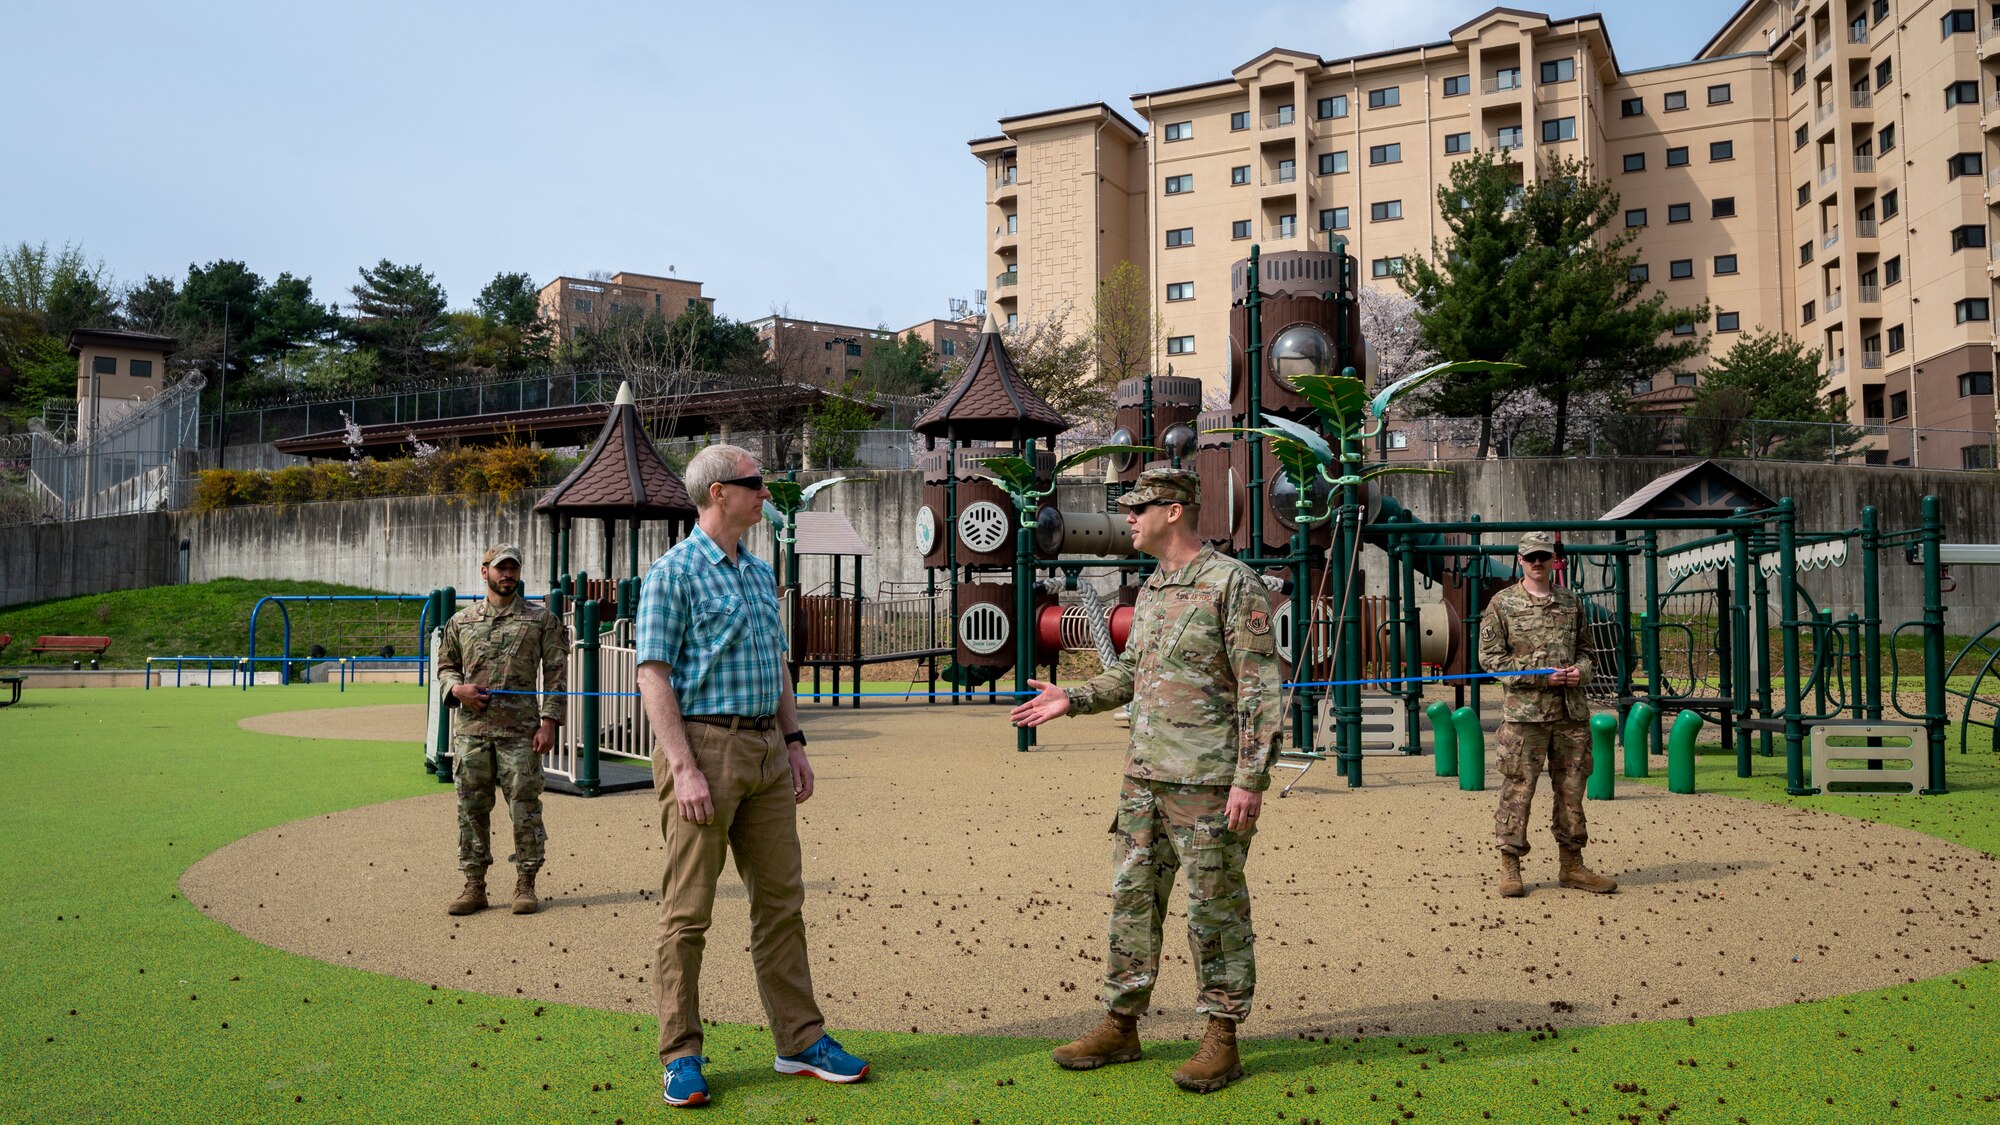 U.S. Air Force Airmen assigned to the 51st Fighter Wing and Camp Yongsan-Casey celebrate the ribbon cutting of Northlake Park at Osan Air Base, Republic of Korea, April 10, 2024. The playground equipment was donated by Camp Yongsan-Casey and the project was recently completed. The joint effort of Osan AB and Camp Yongsan-Casey supported Airmen and their families by providing a space to interact with community members and perform physical activities. (U.S. Air Force photo by Senior Airman Sabrina Fuller-Judd)